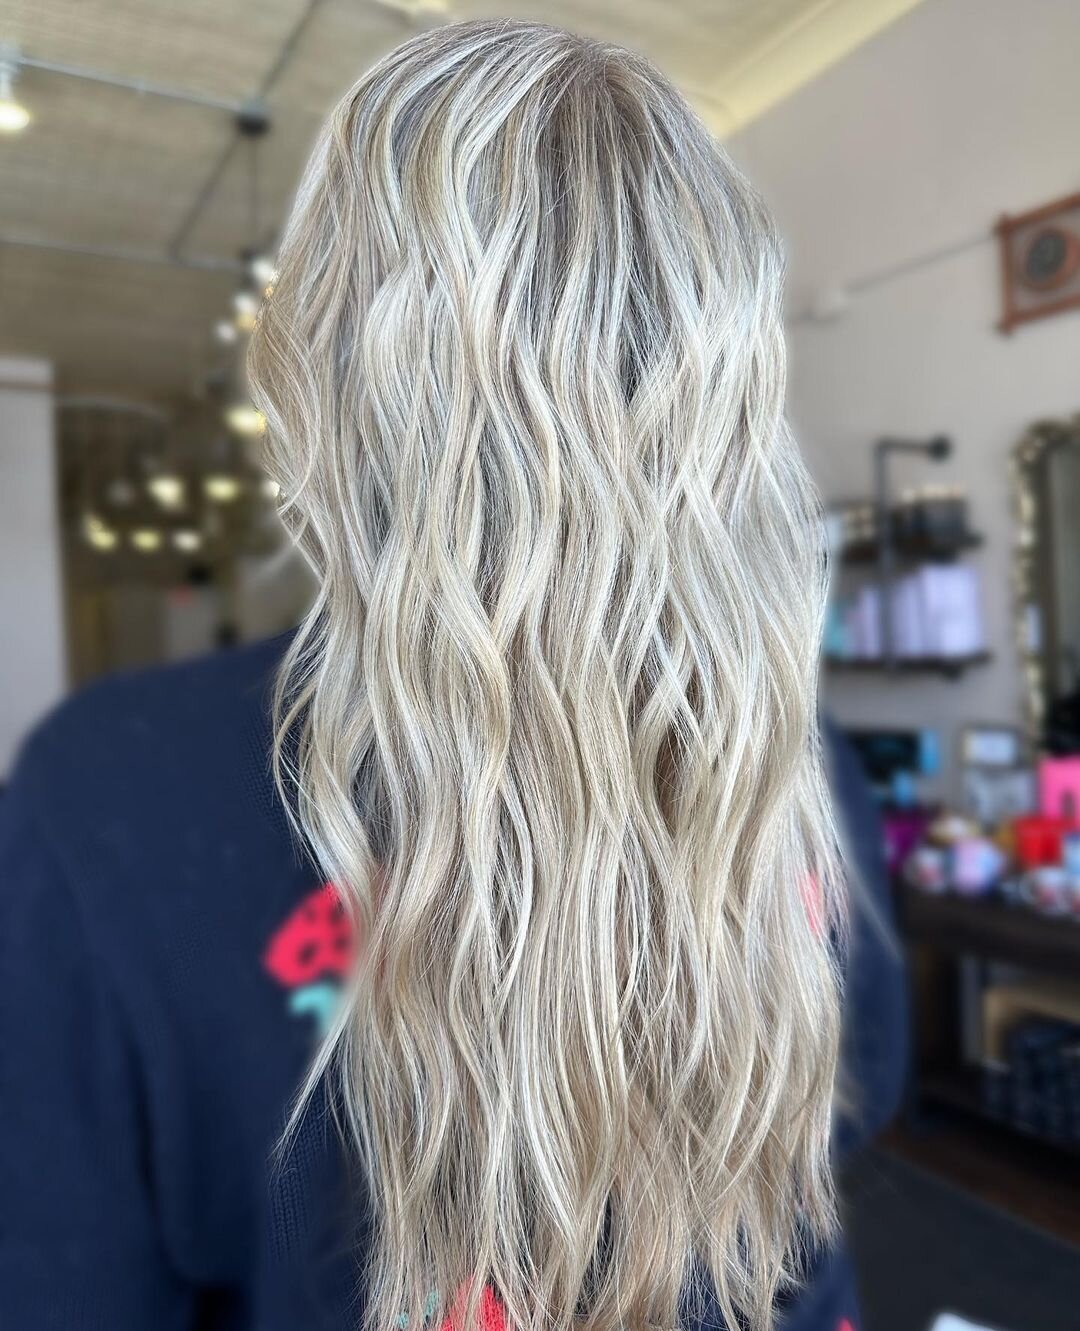 @sadie.yvonne.hair is giving us dreamy blondes for days 😍😍
.
.
.
.
.
.
.
.
 #minnesota #minneapolissalon #twincitieshair #hairstyle #mnhairsalon #haircoloring #minneapolishairstylist #hairstylist #haircolor #mplshair #redkenshadeseq #haircolorgoals